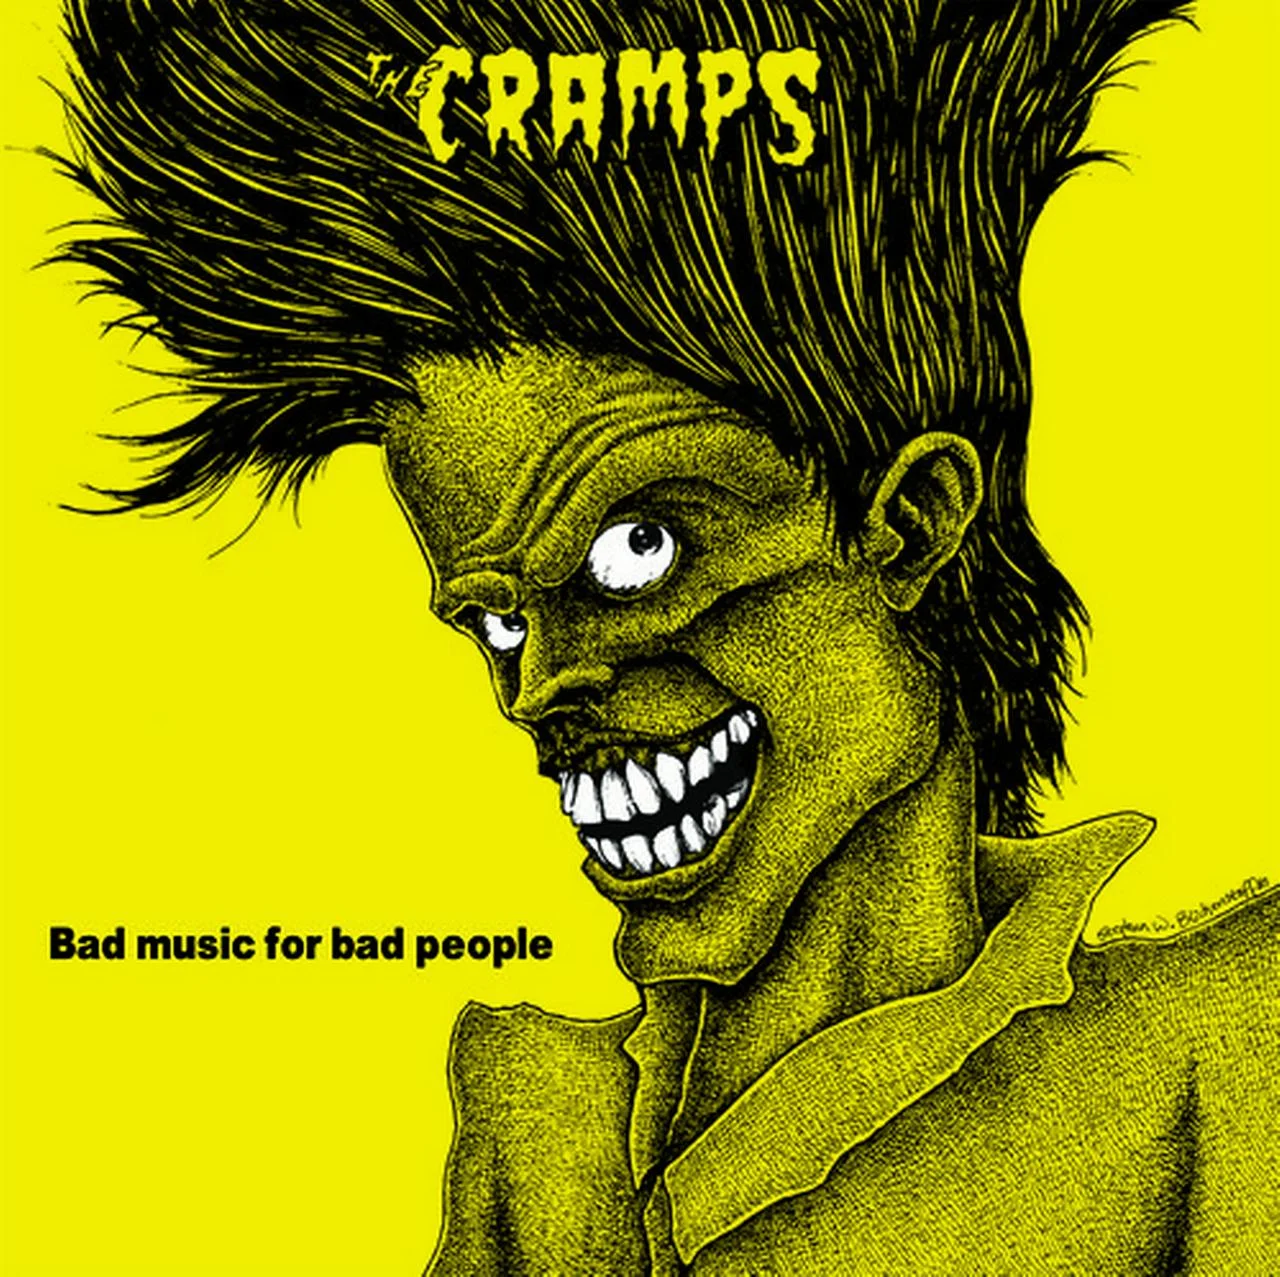 alt="The Cramps - Bad Music For Bad People (1984, I.R.S. Records) COVER"